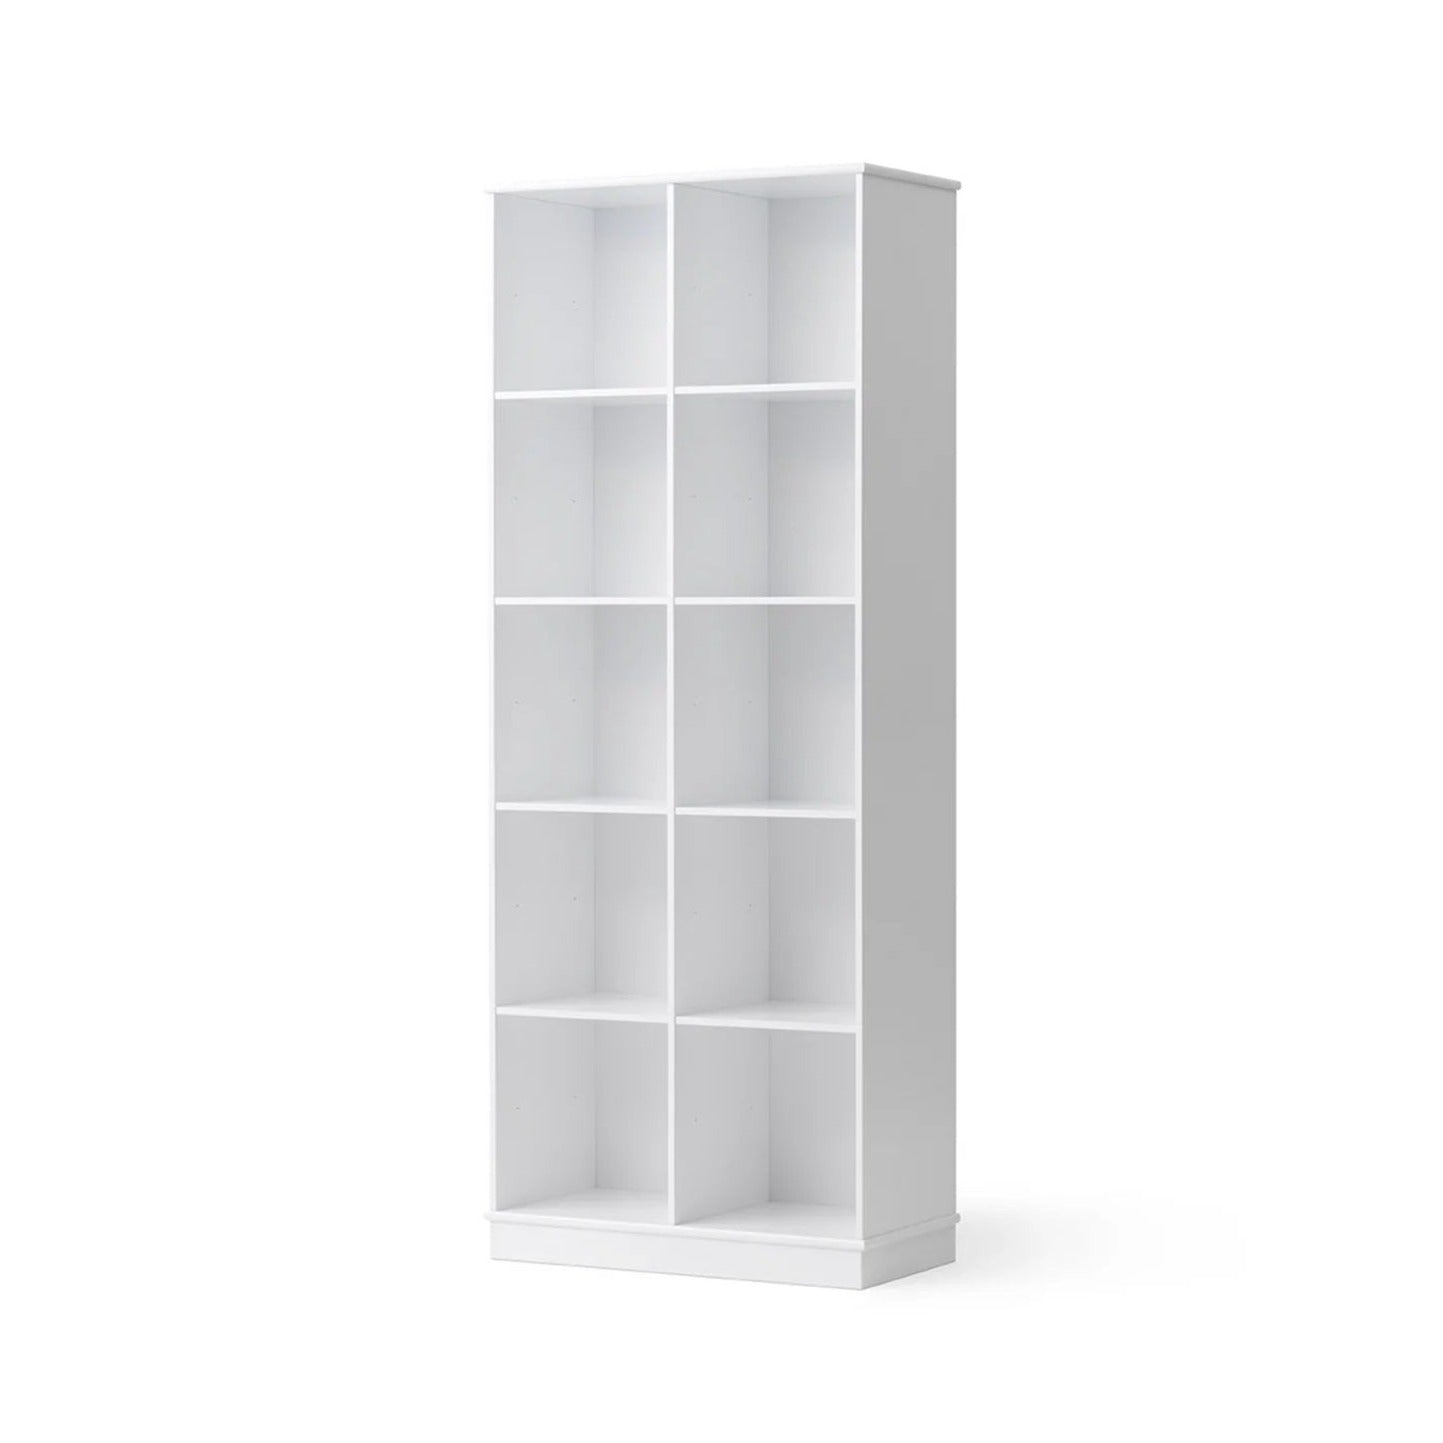 Oliver Furniture Wood Standing Shelving Unit - 2 x 5 With Base